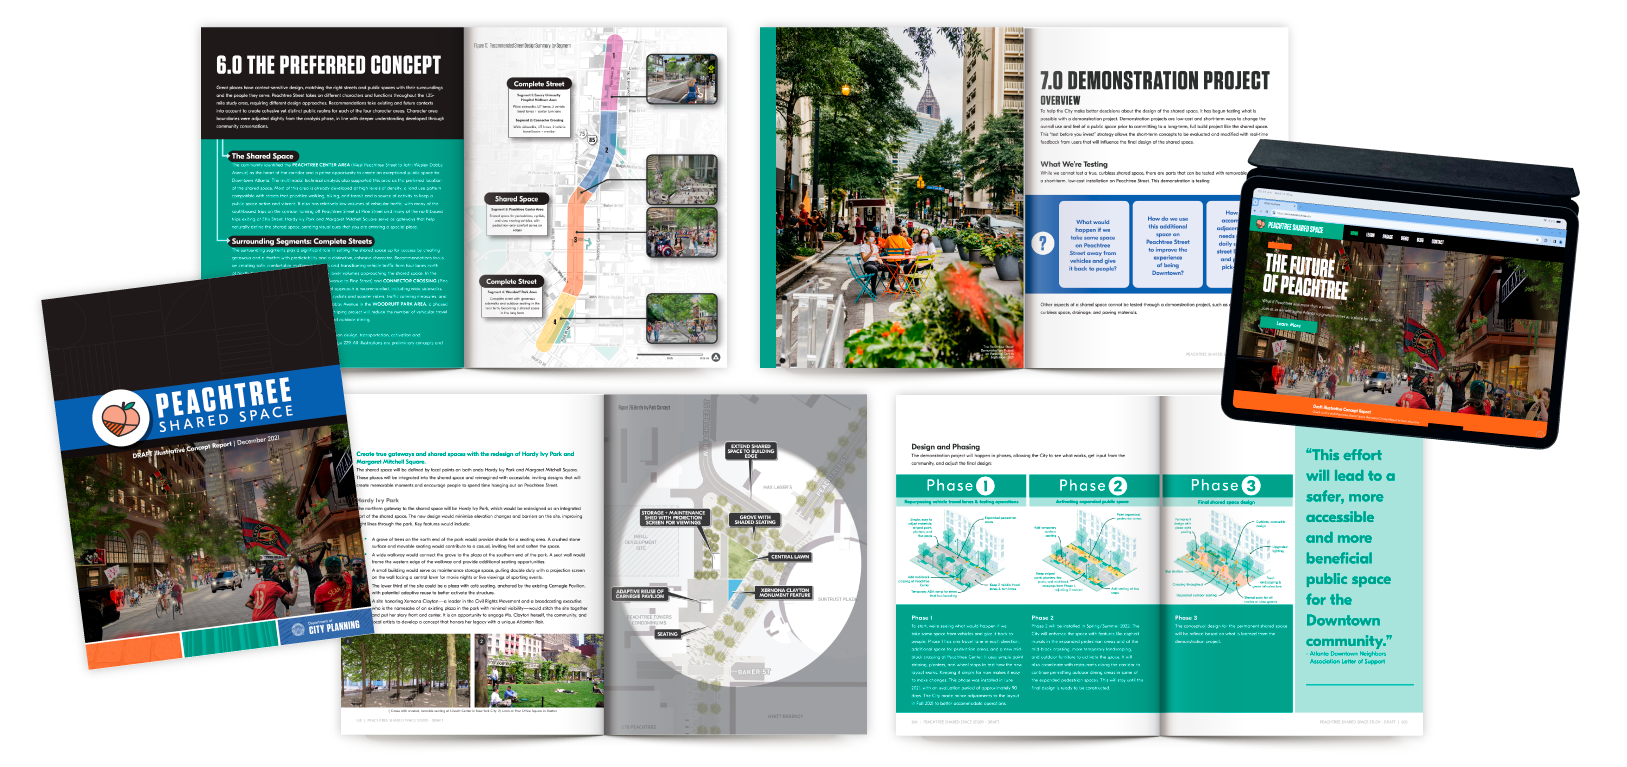 A mockup layout of the Peachtree Shared Space Concept Report highlighting a selected group of pages from the document and project website.